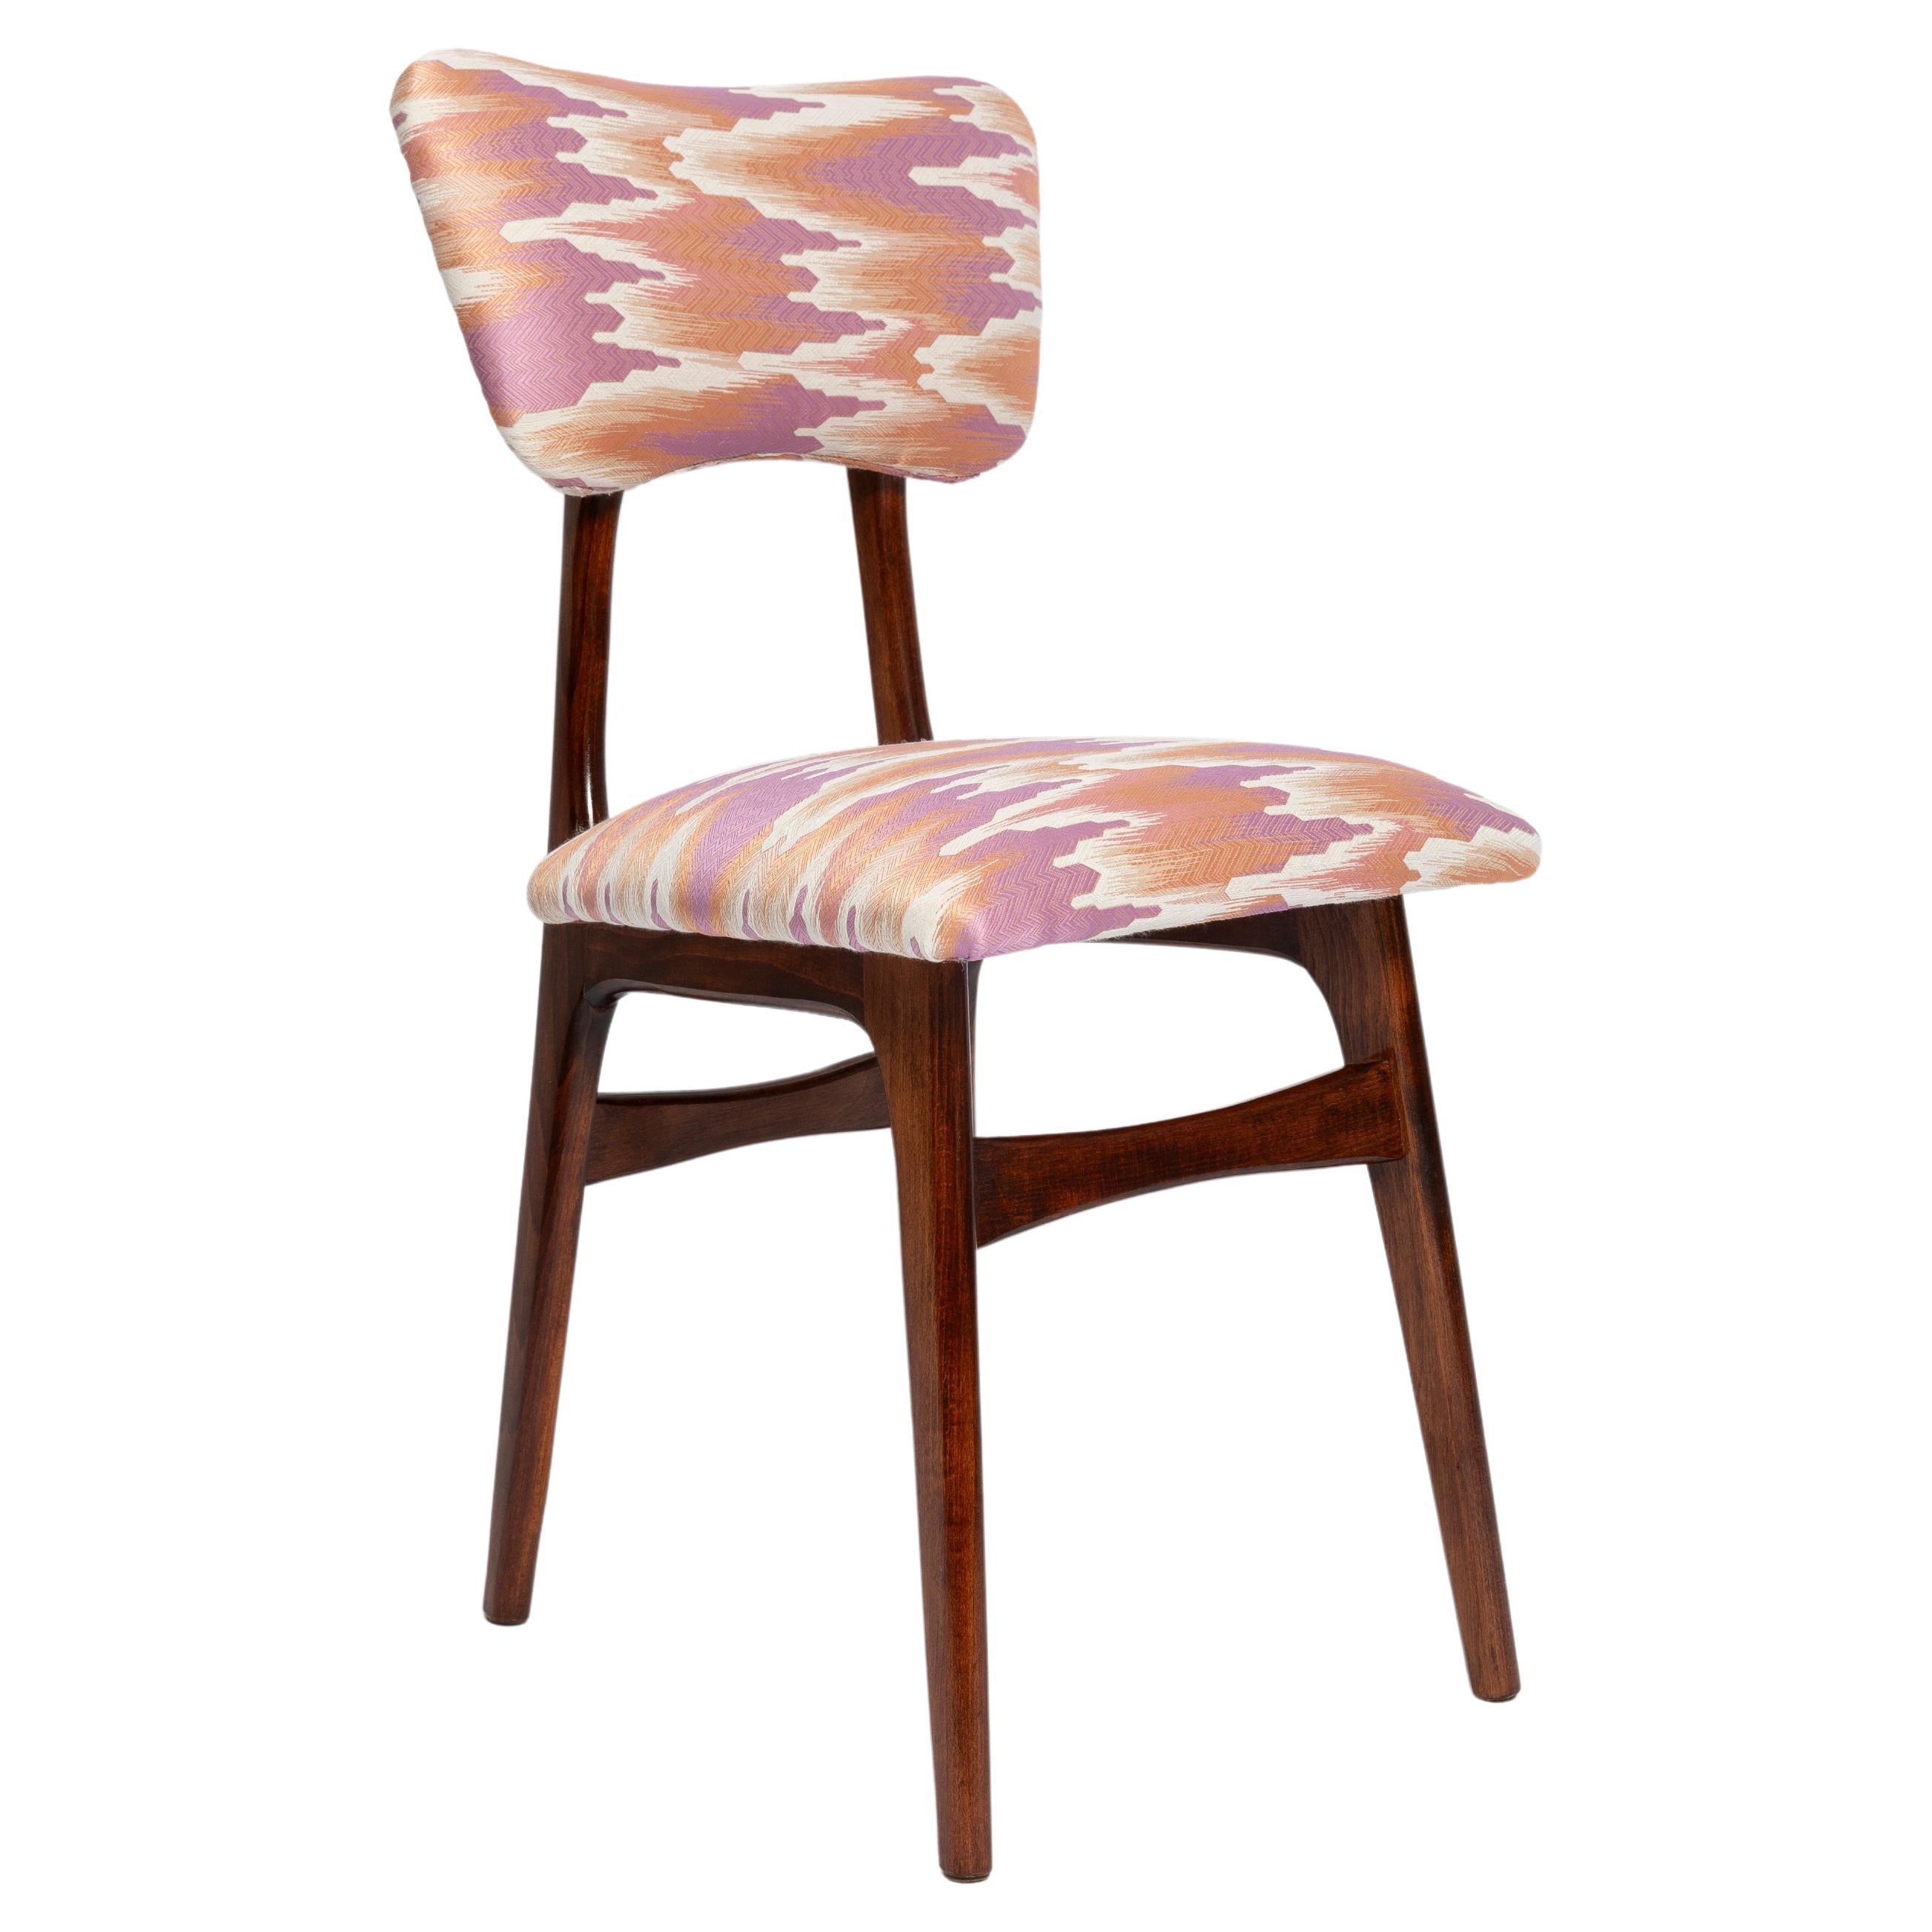 Mid Century Butterfly Chair, Pink Fandango Jacquard, Dark Wood, Europe, 1960s For Sale